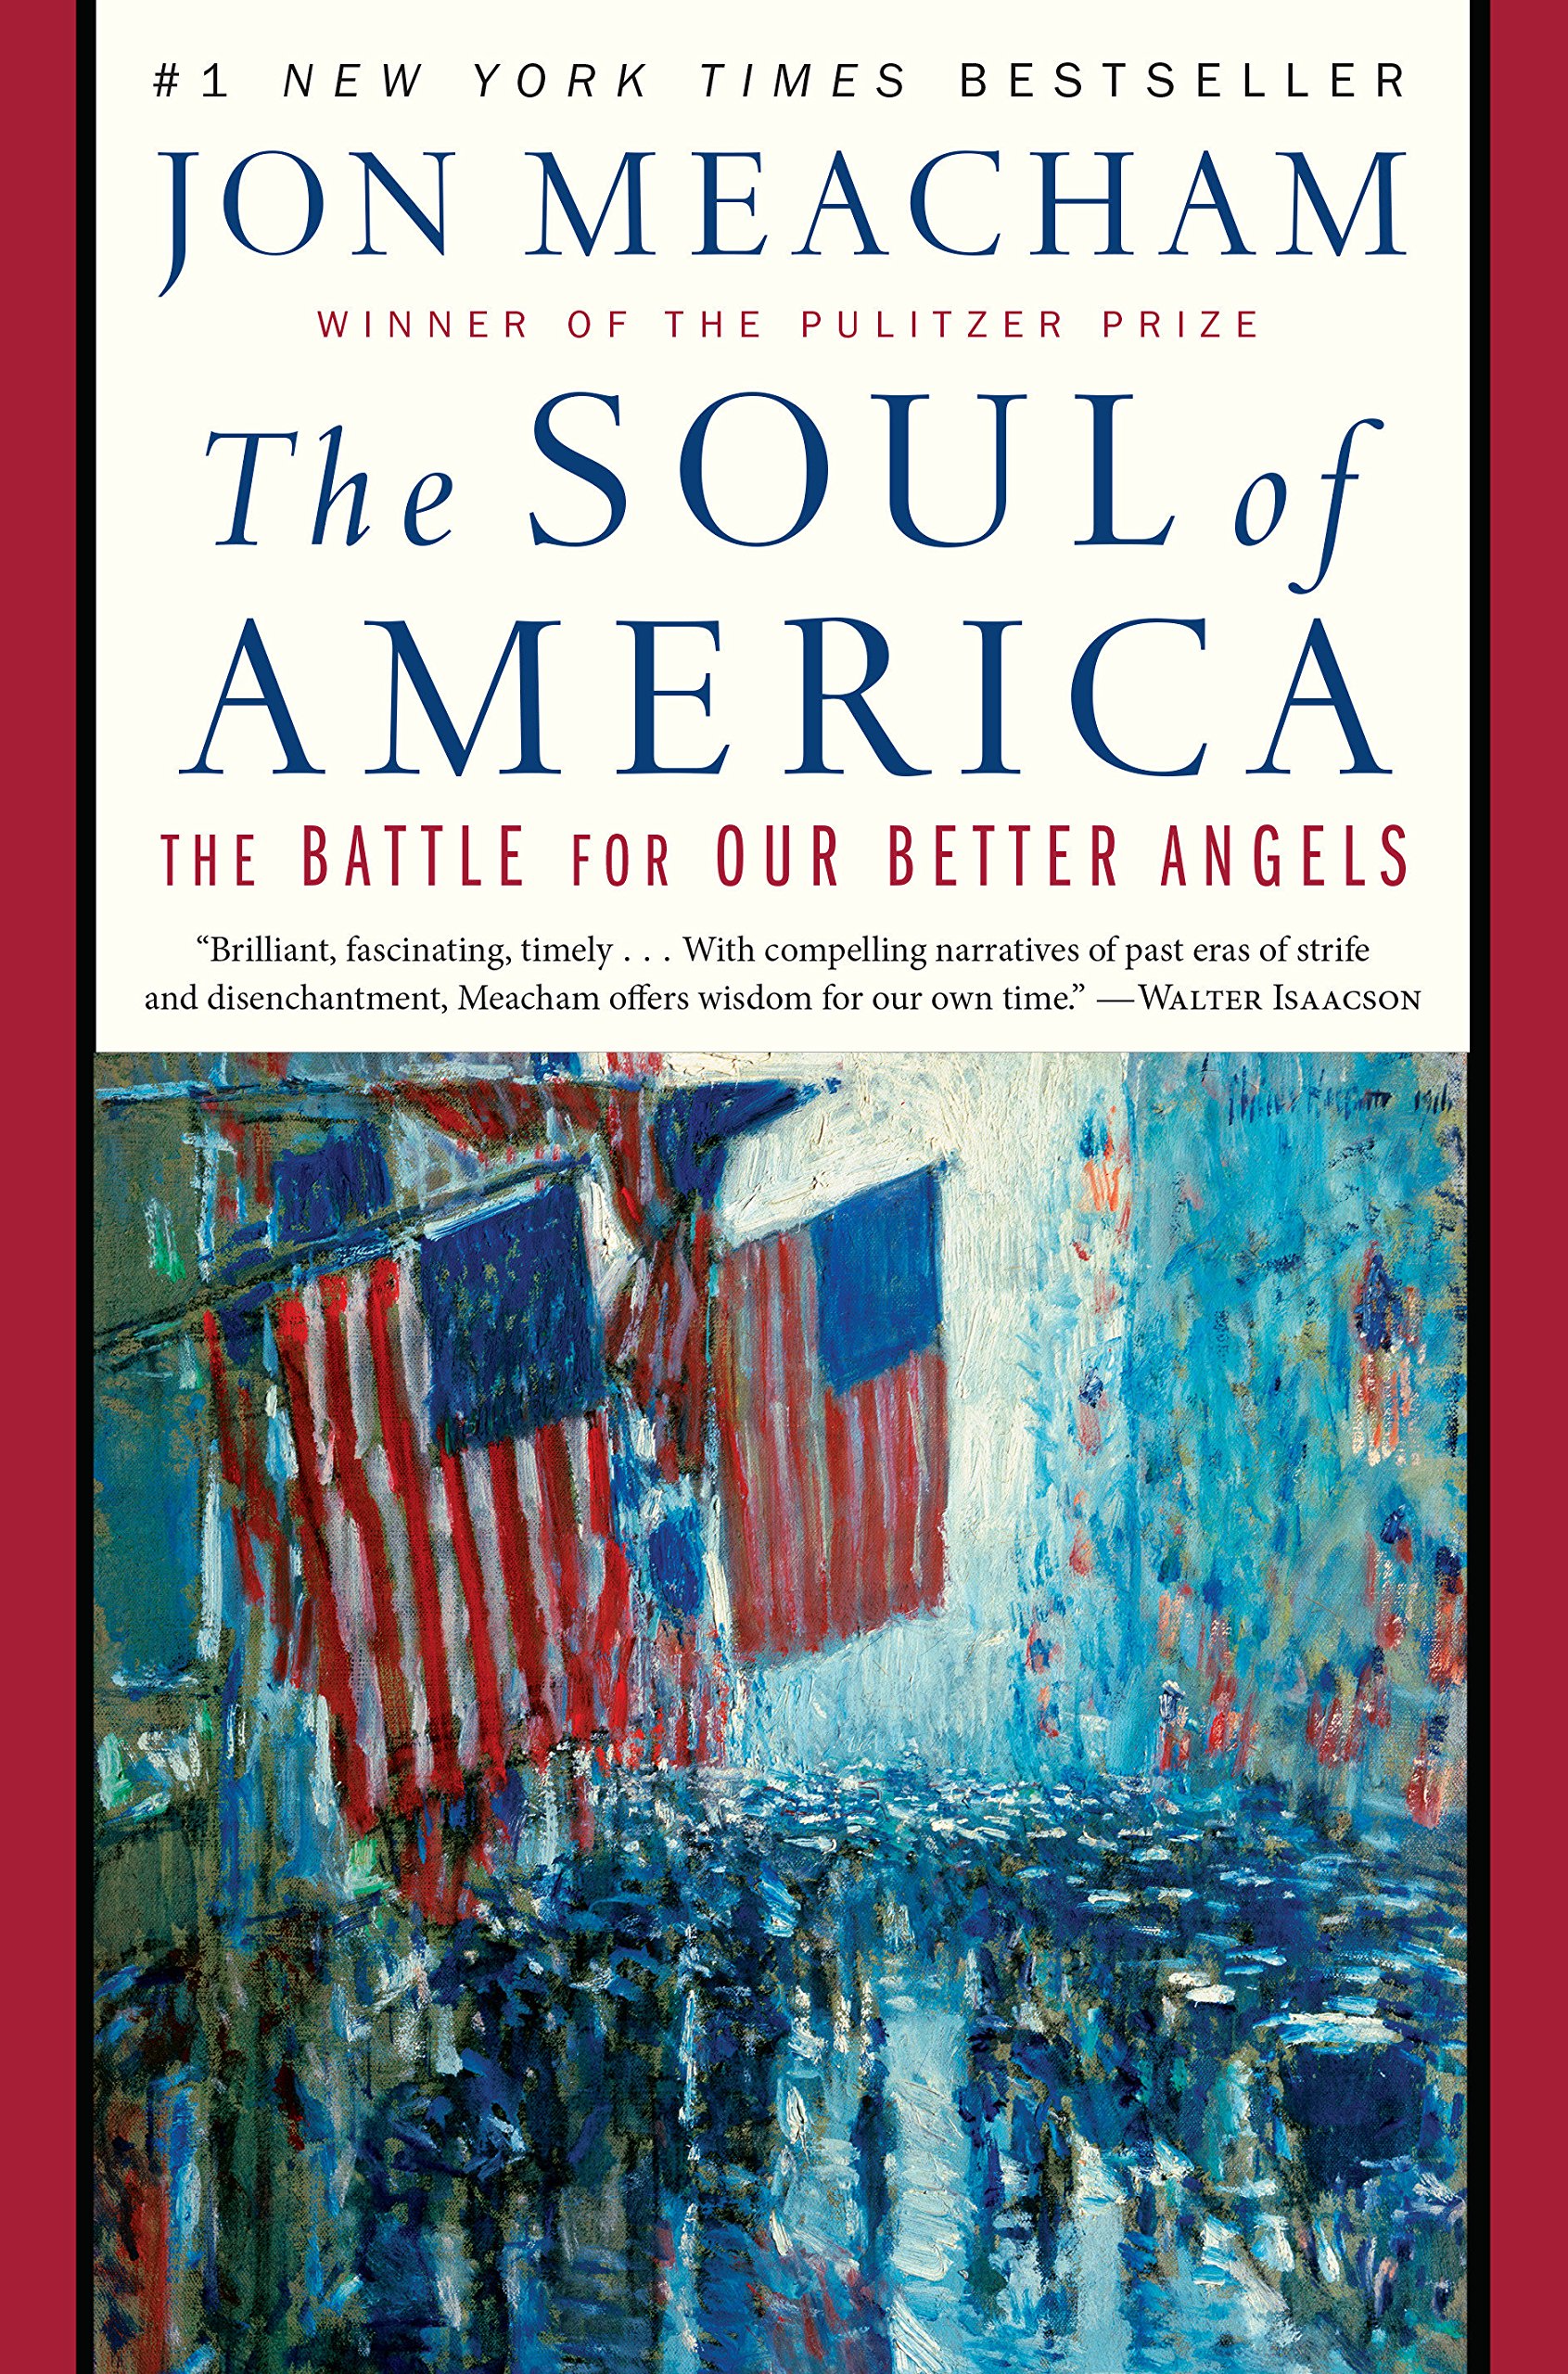 Cover of "The Soul of America" by Jon Meacham